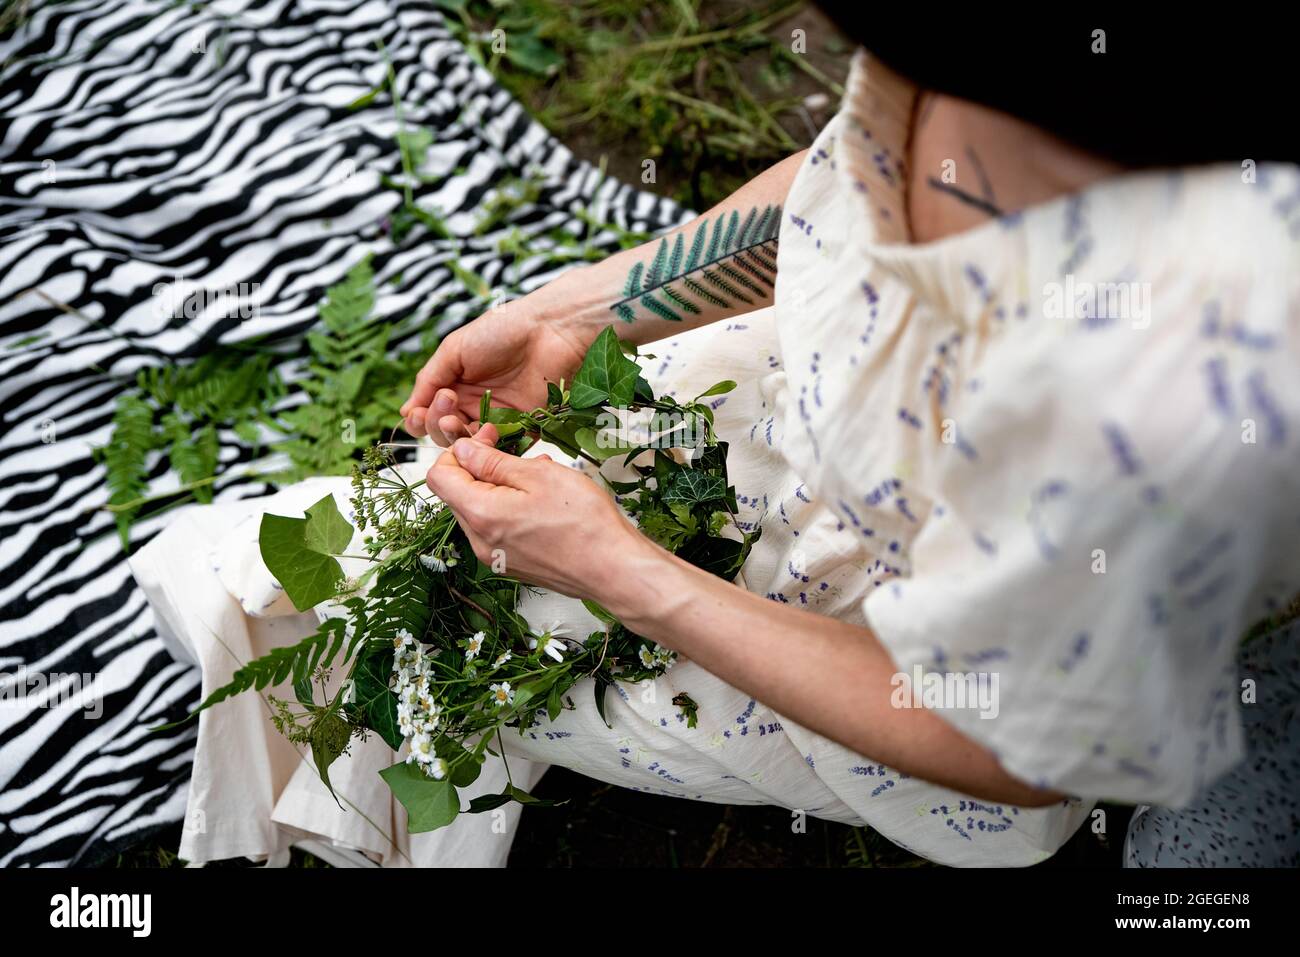 Woman making head wreath with wild flowers. Close up of hands weaving a wreath with green leaves and flowers Stock Photo